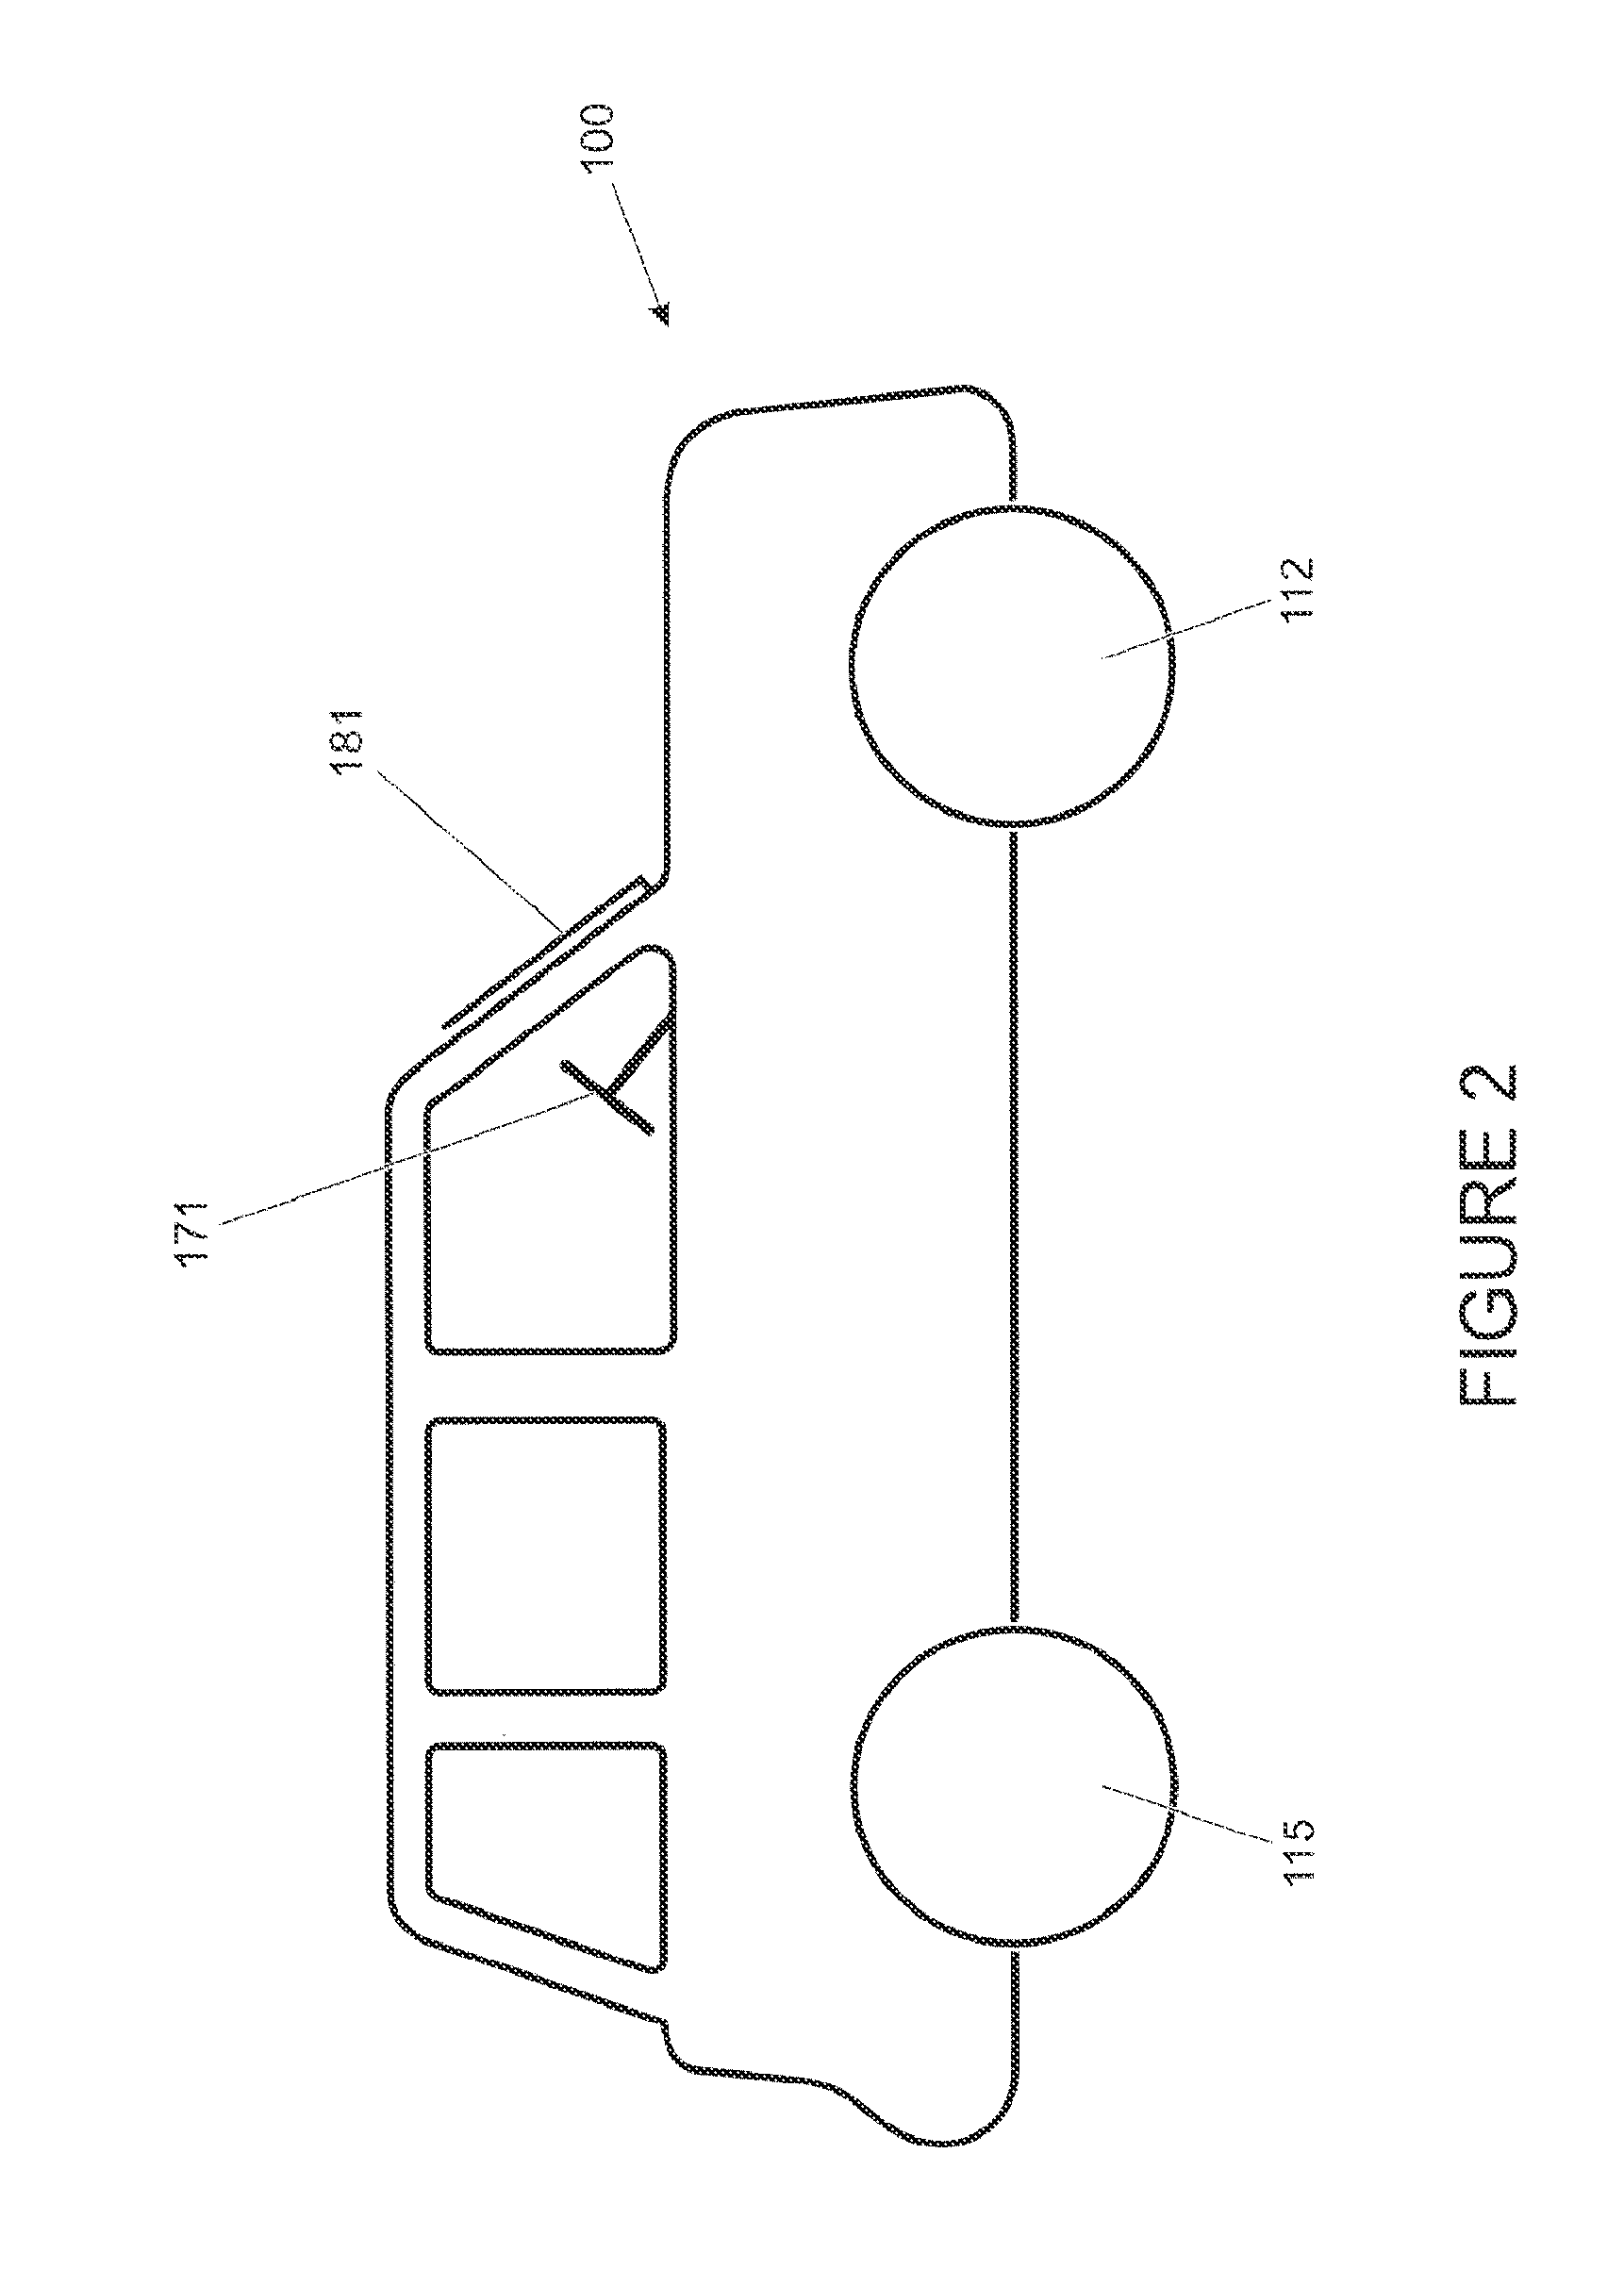 Vehicle speed control system